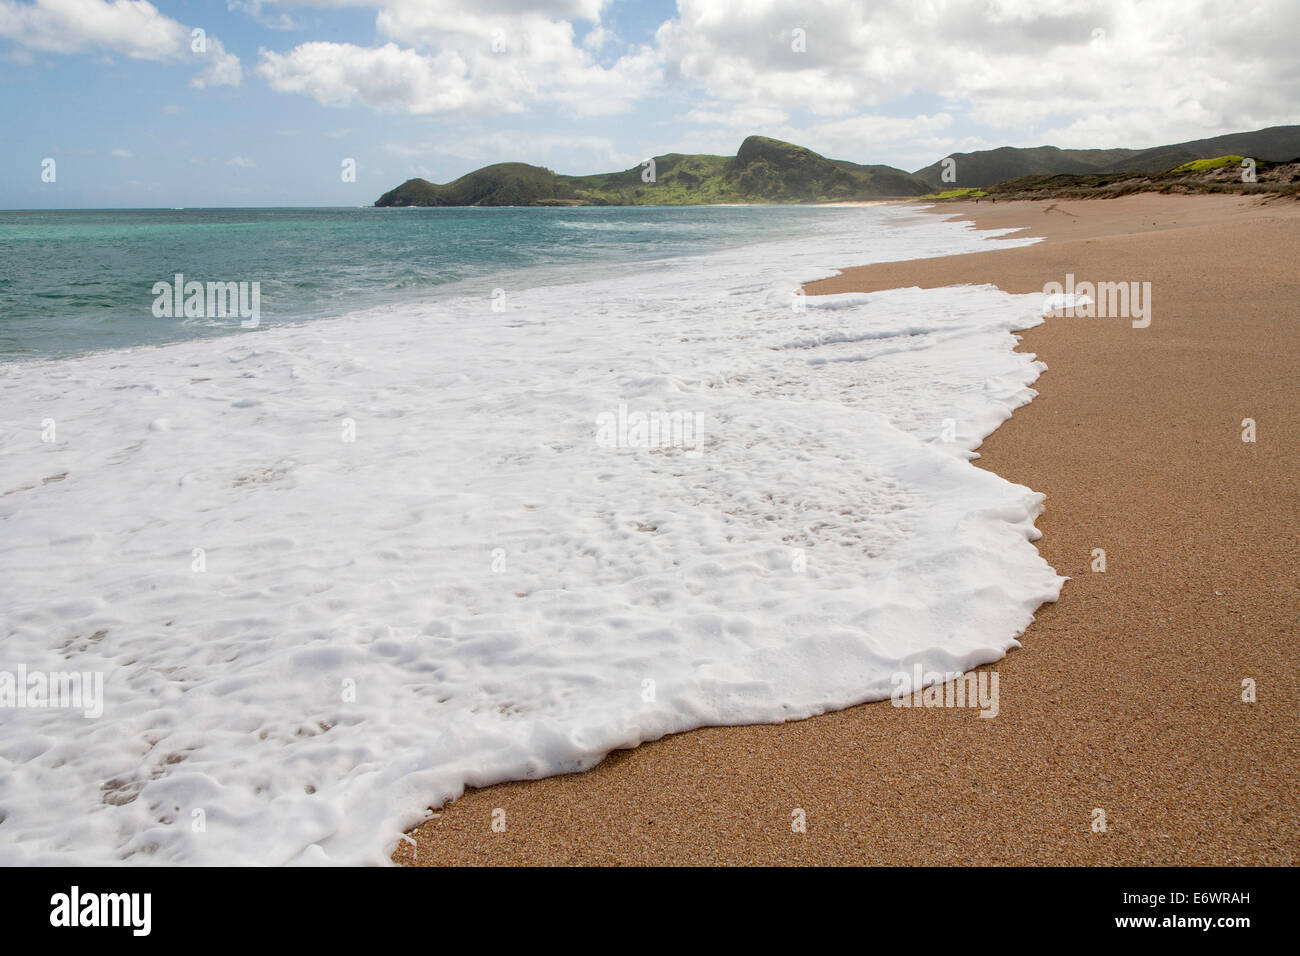 Deserted beach with golden sand, northern coast, North Island, New Zealand Stock Photo